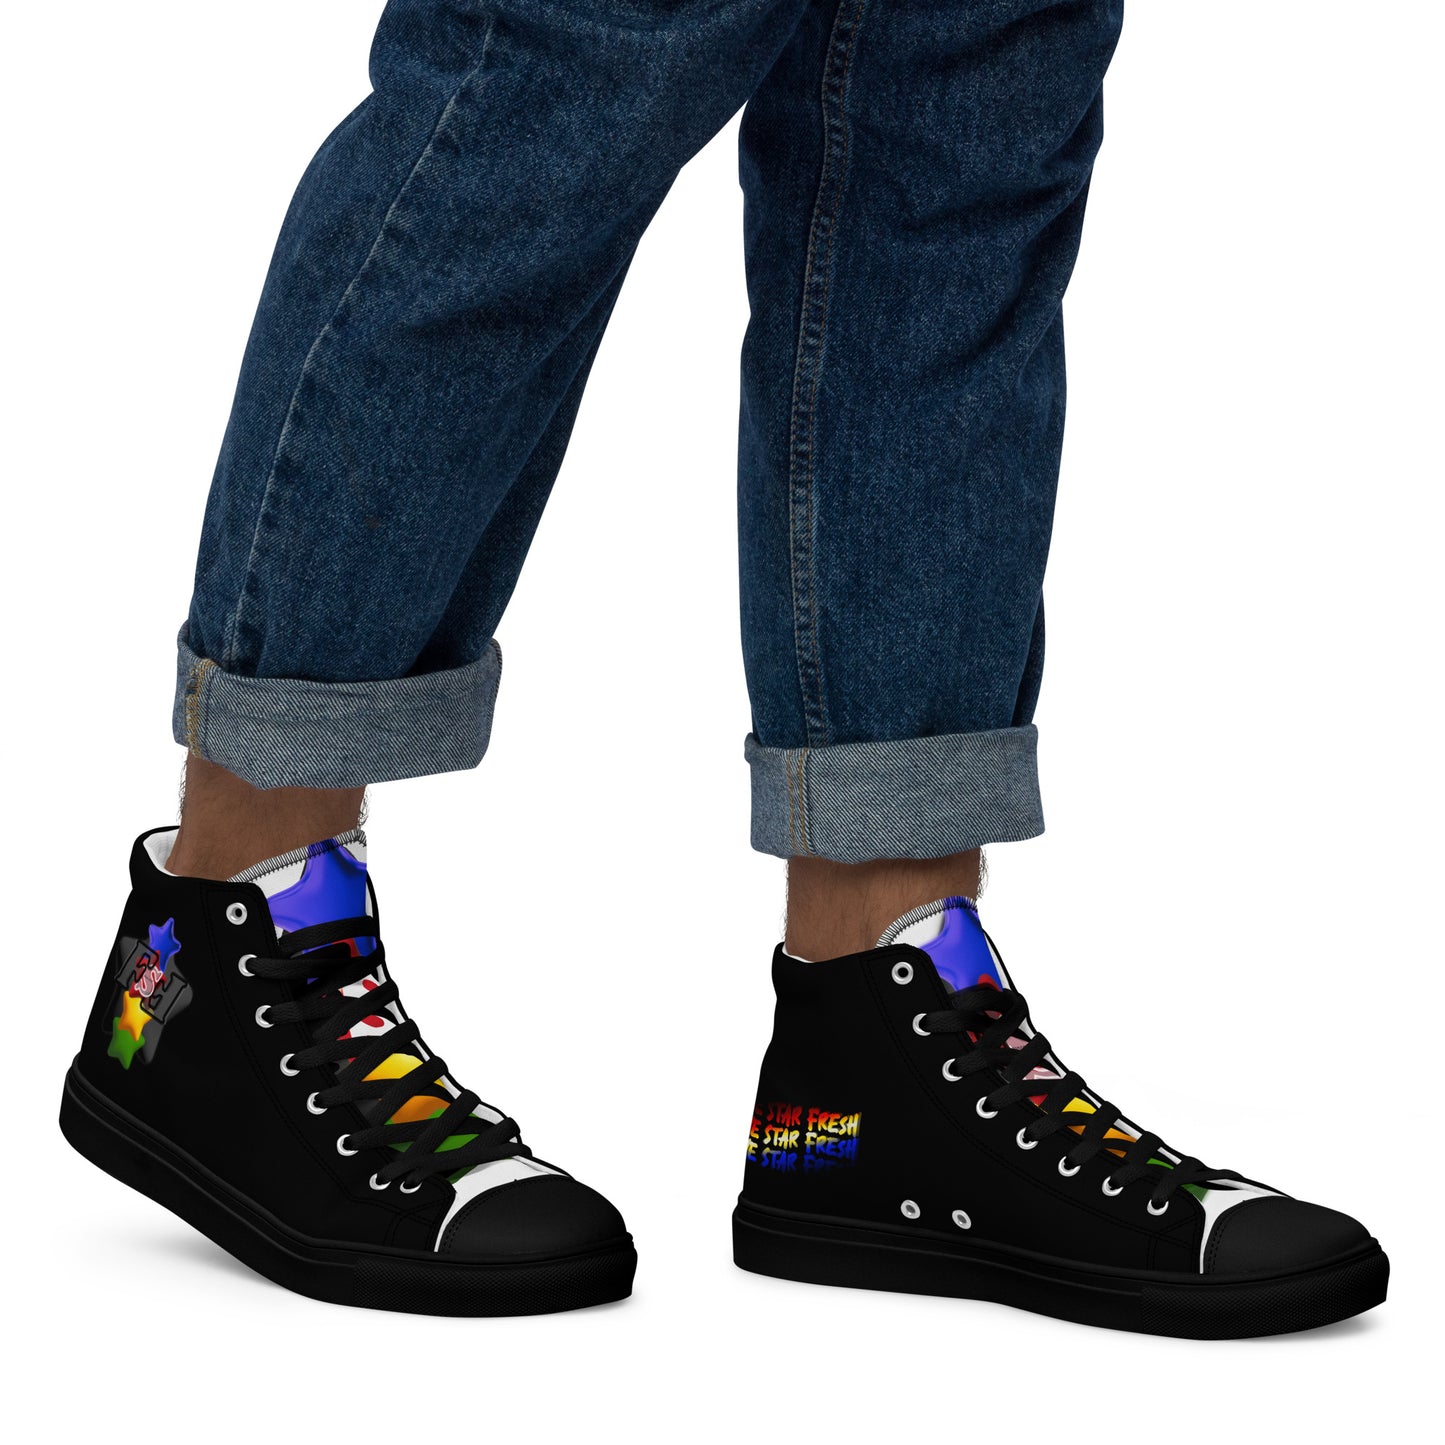 Men’s high top canvas shoes - FSF Stacked 'Black Star' Black